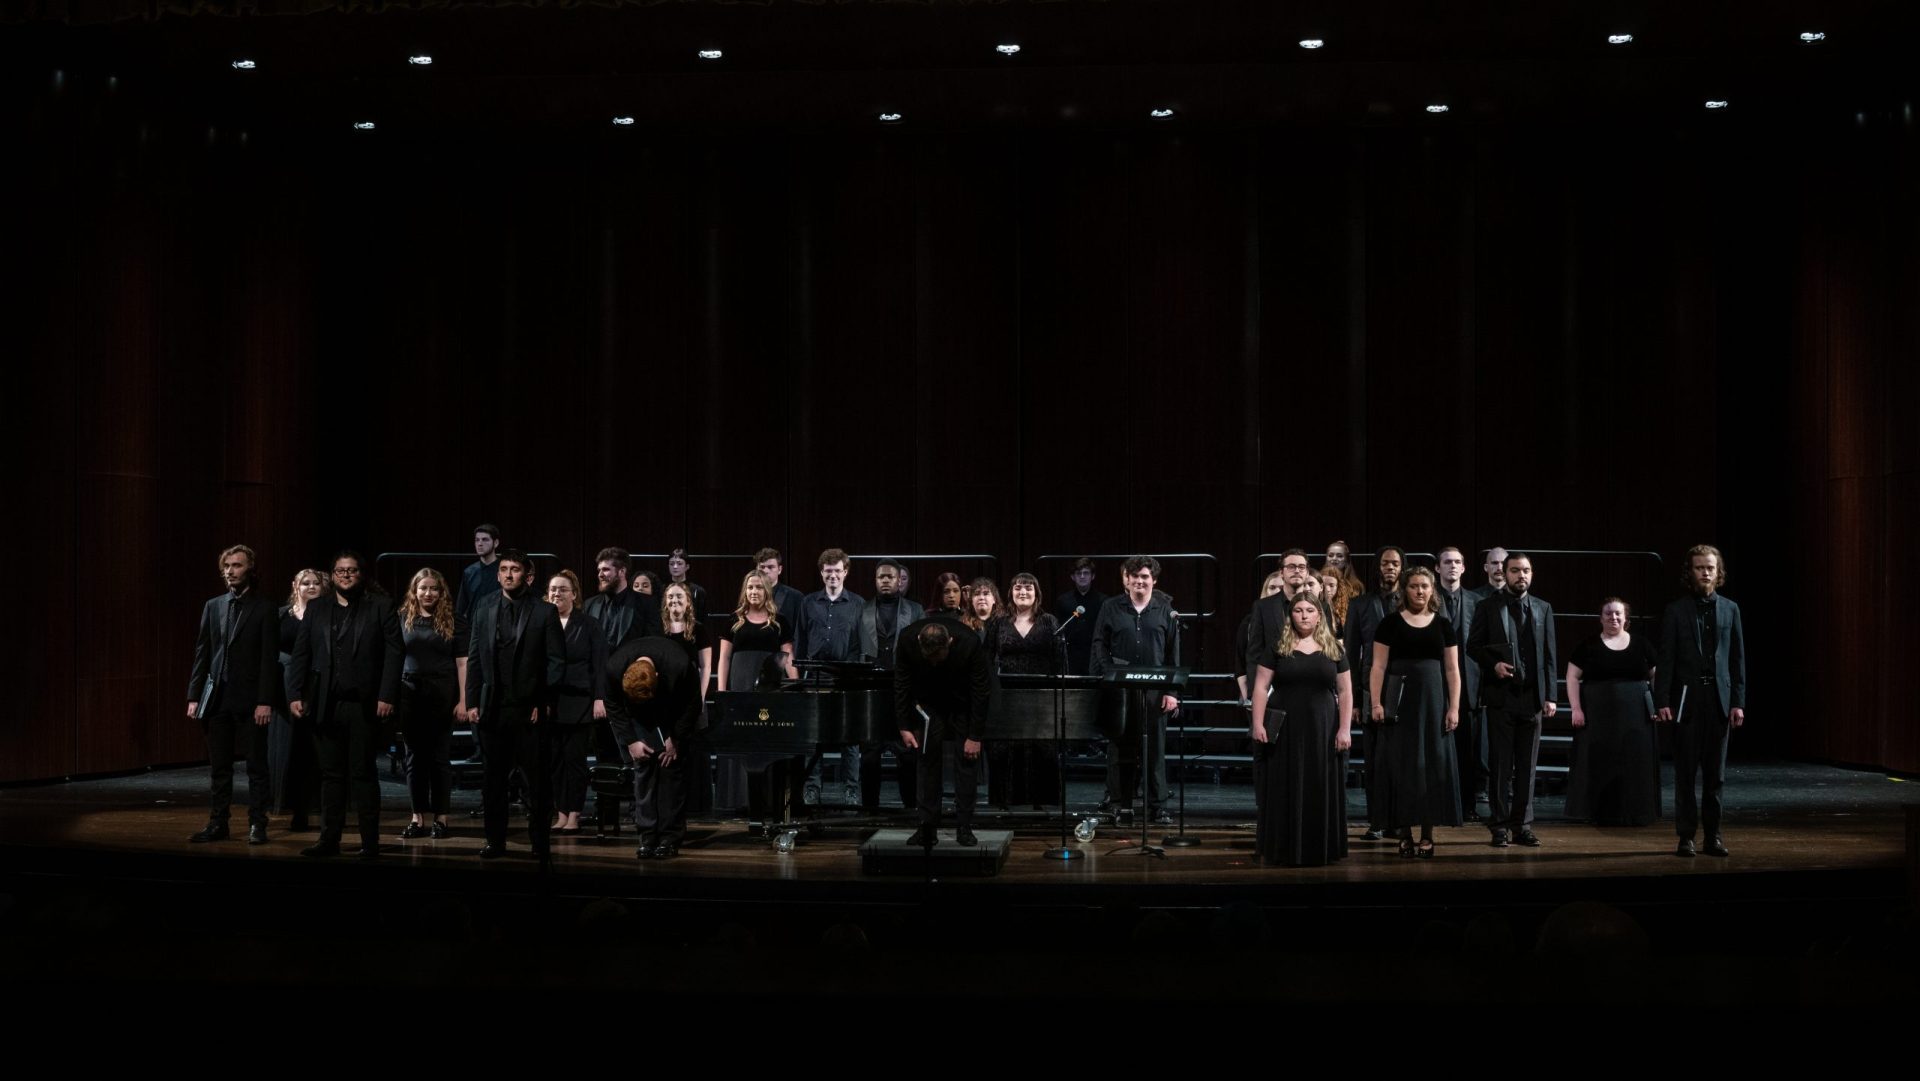 Pictured: The Rowan University Concert Choir Singing in their final performance of the spring 2023 semester.